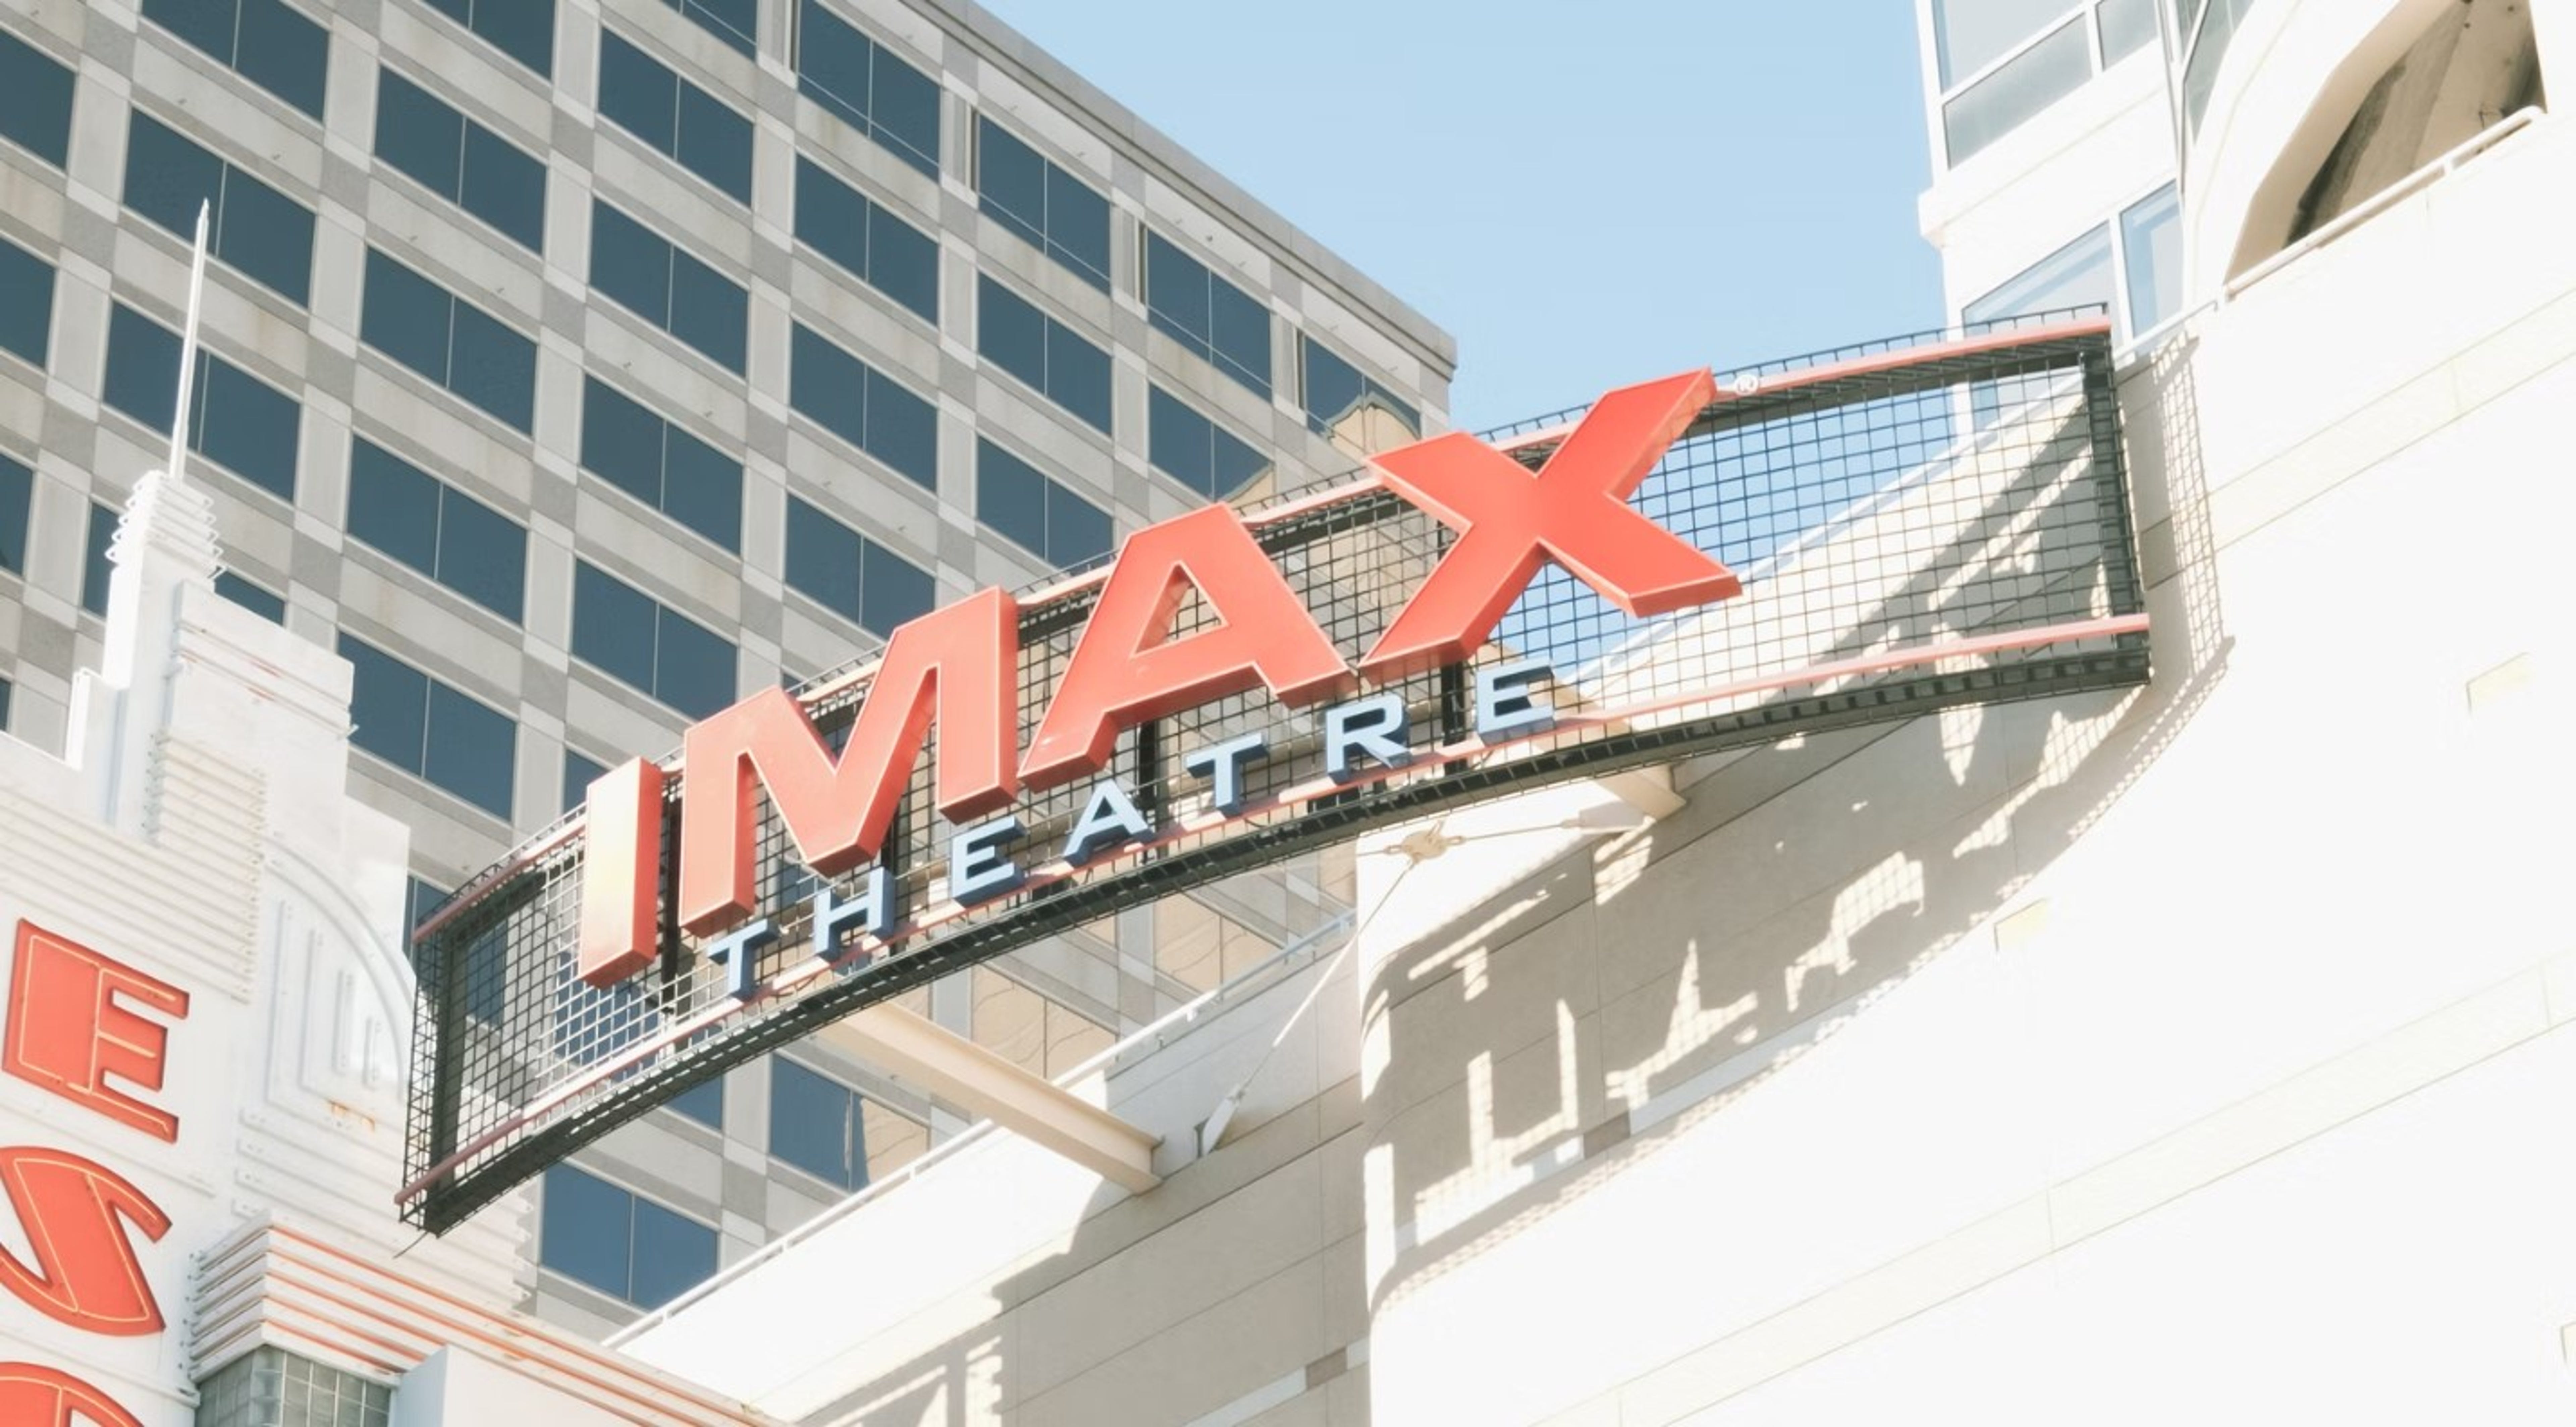 Is Imax Going To Offer A Cryptocurrency To Customers Just For Watching A Movie?